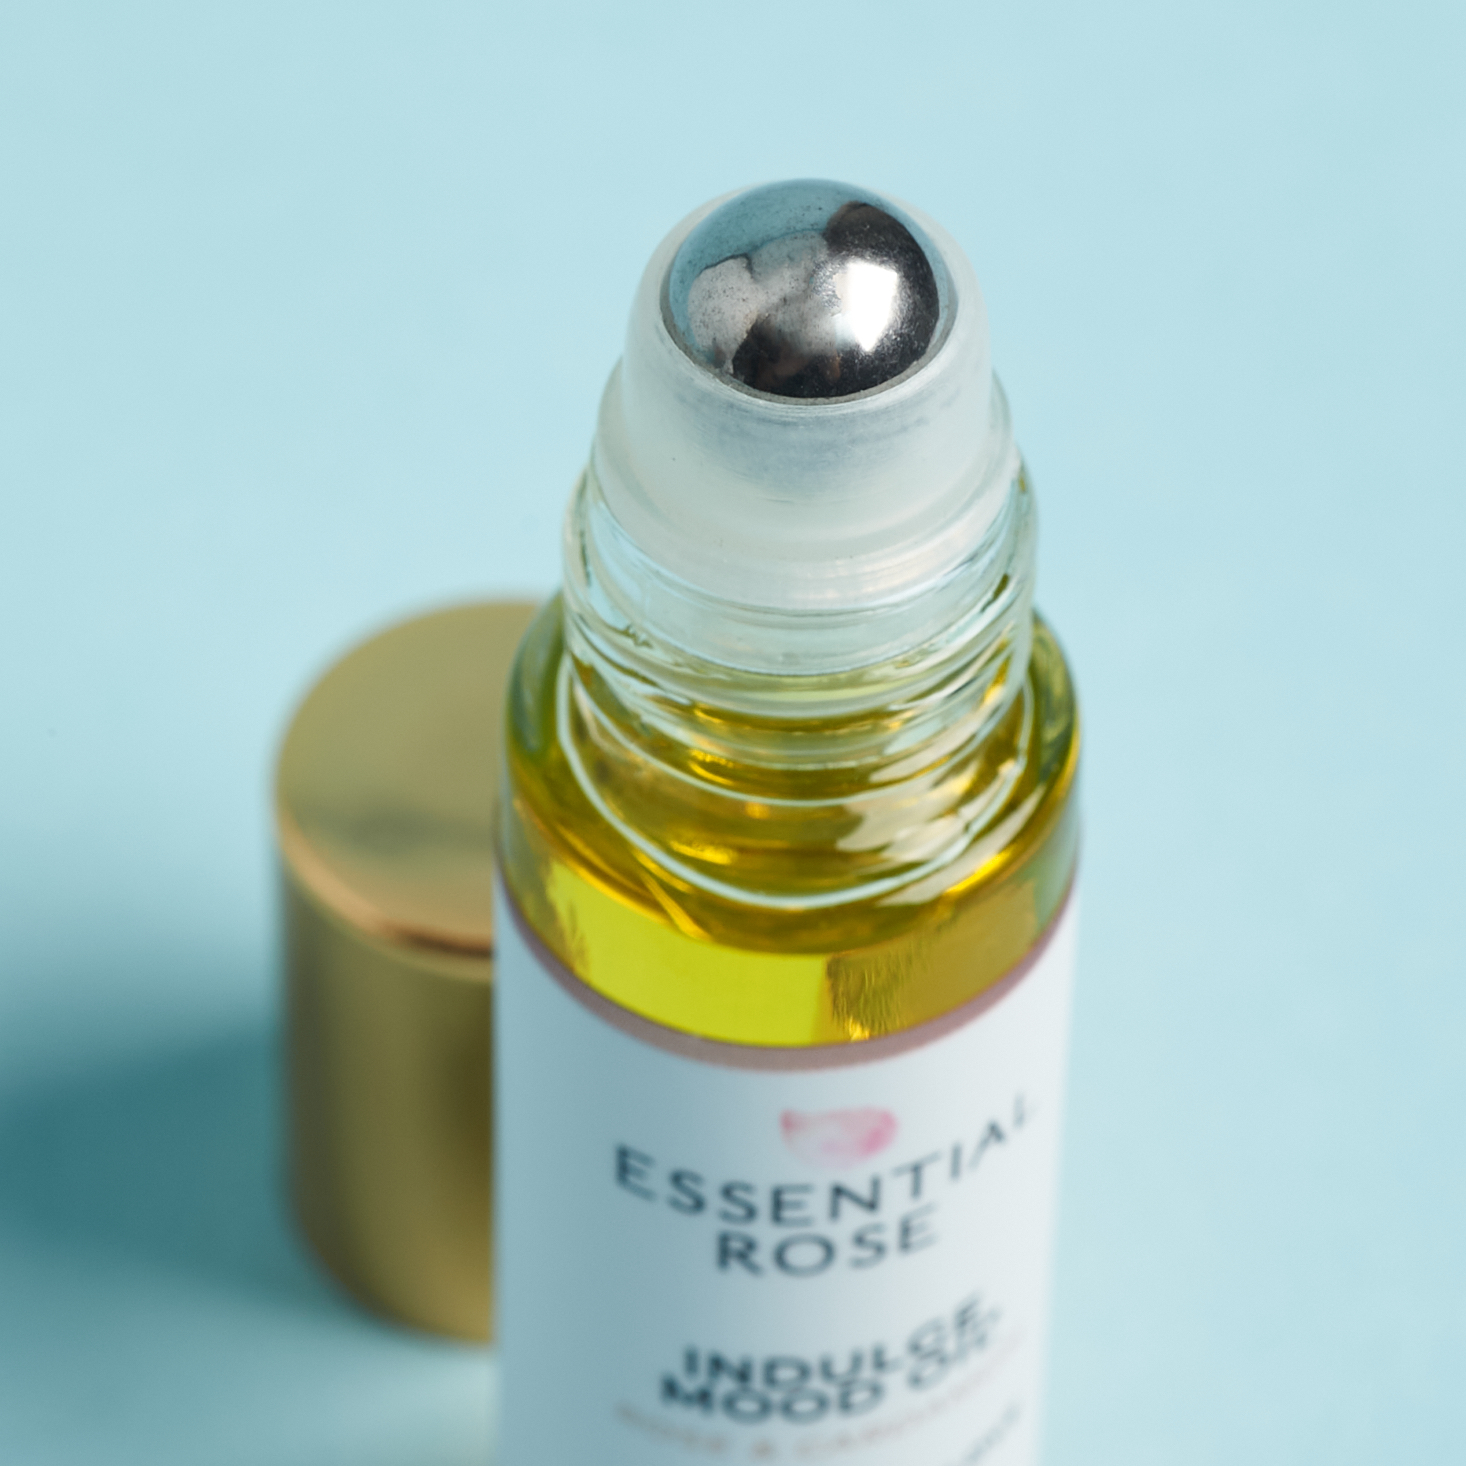 Essential Rose Life Indulge Mood Fragrance Oil Open for Nourish Beauty Box August 2020